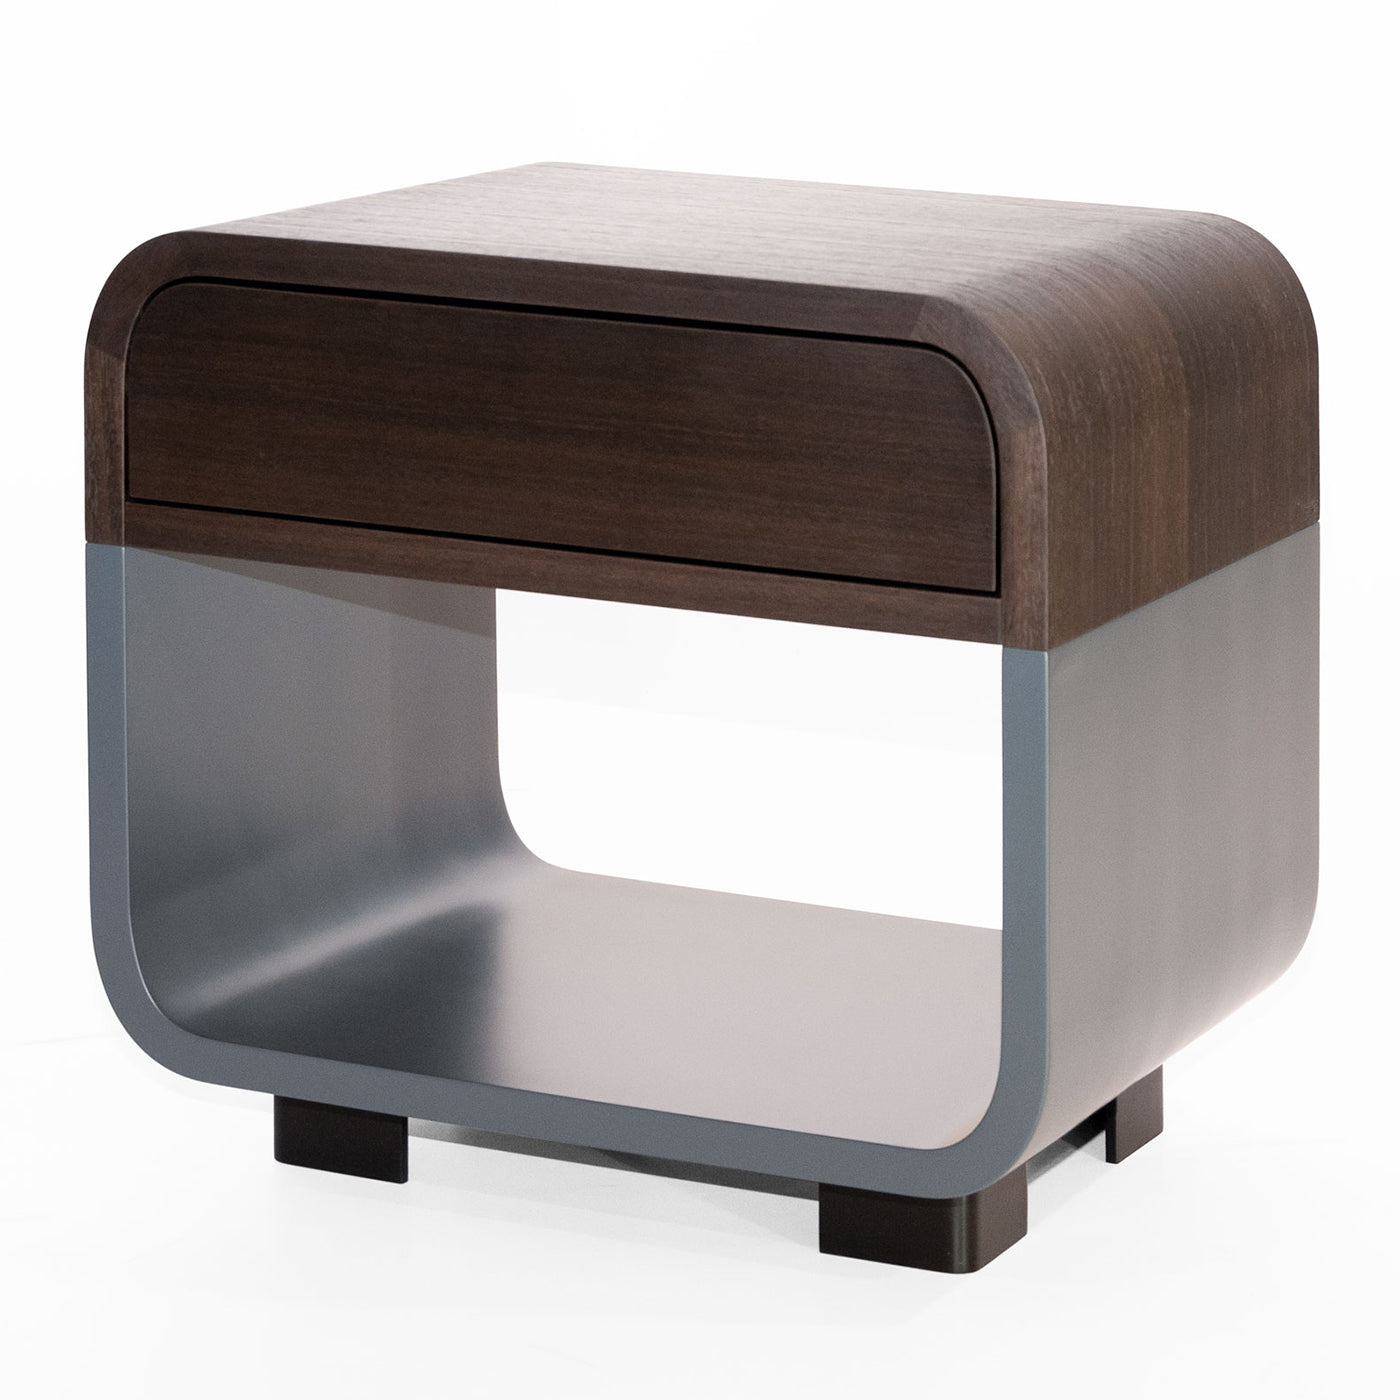 Tabaco Brown Nightstand  - Alternative view 1